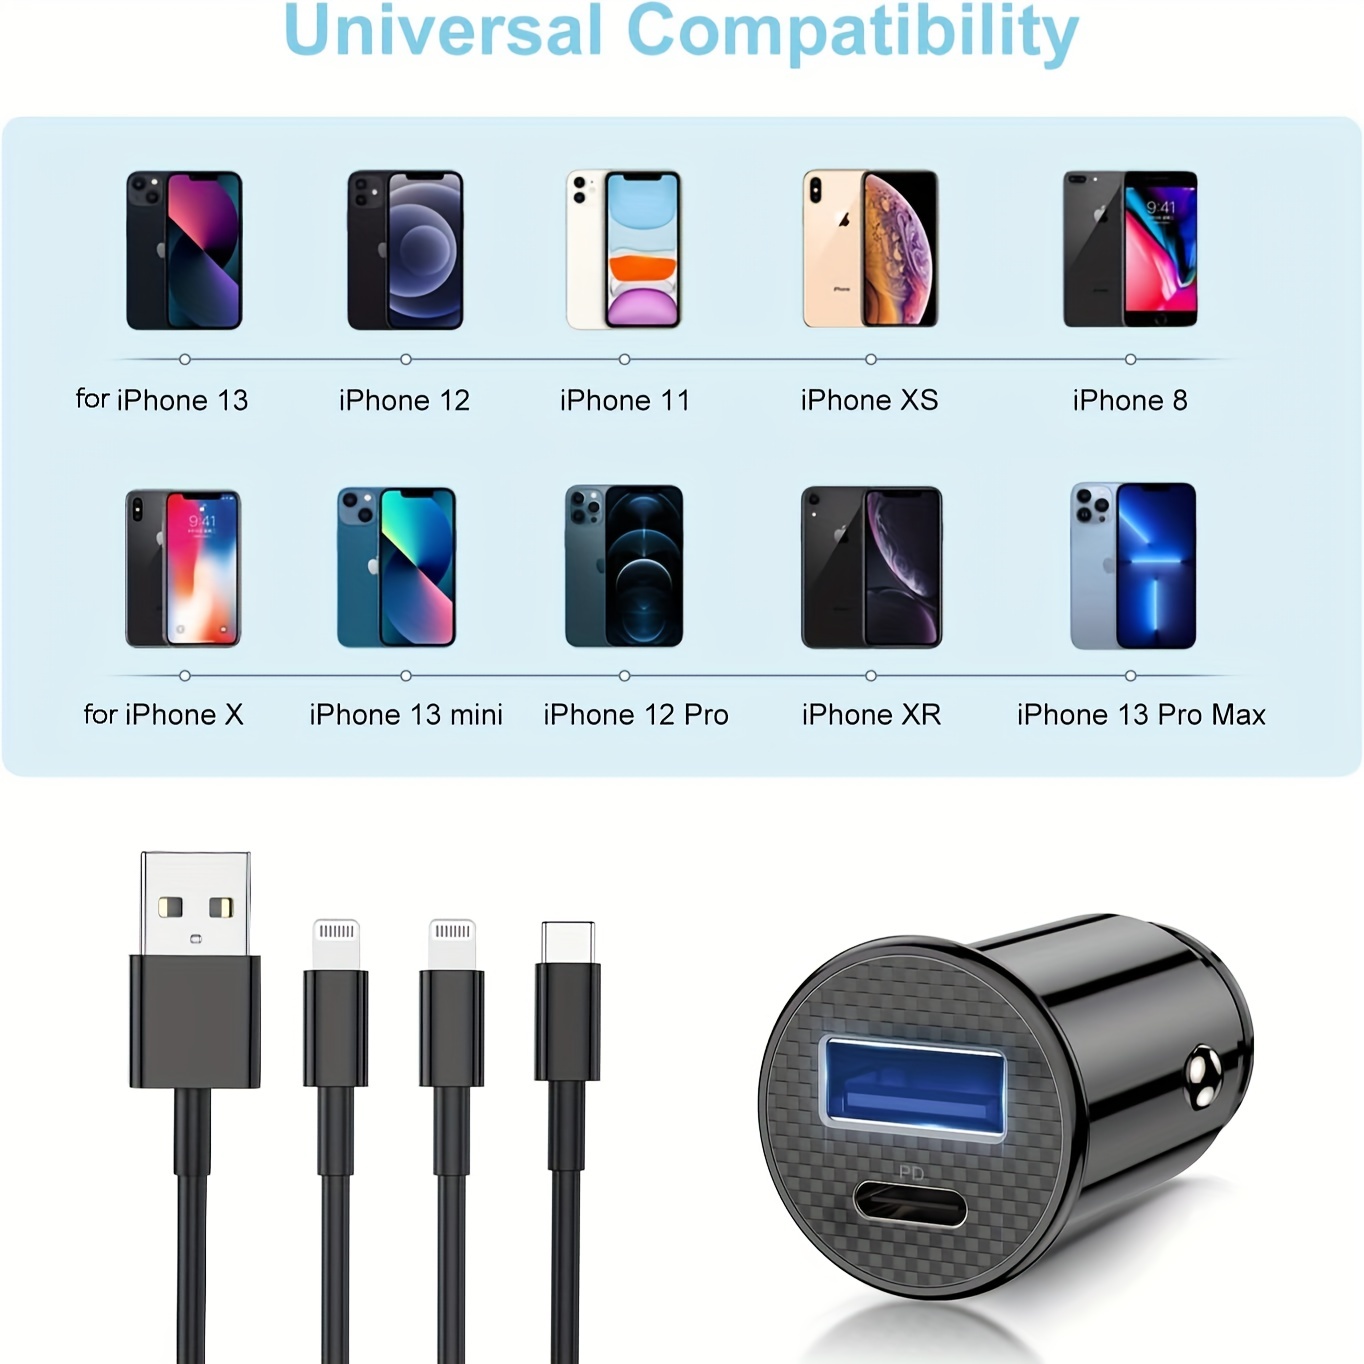 24W Dual USB-A Car Charger + USB-A to Lightning Cable